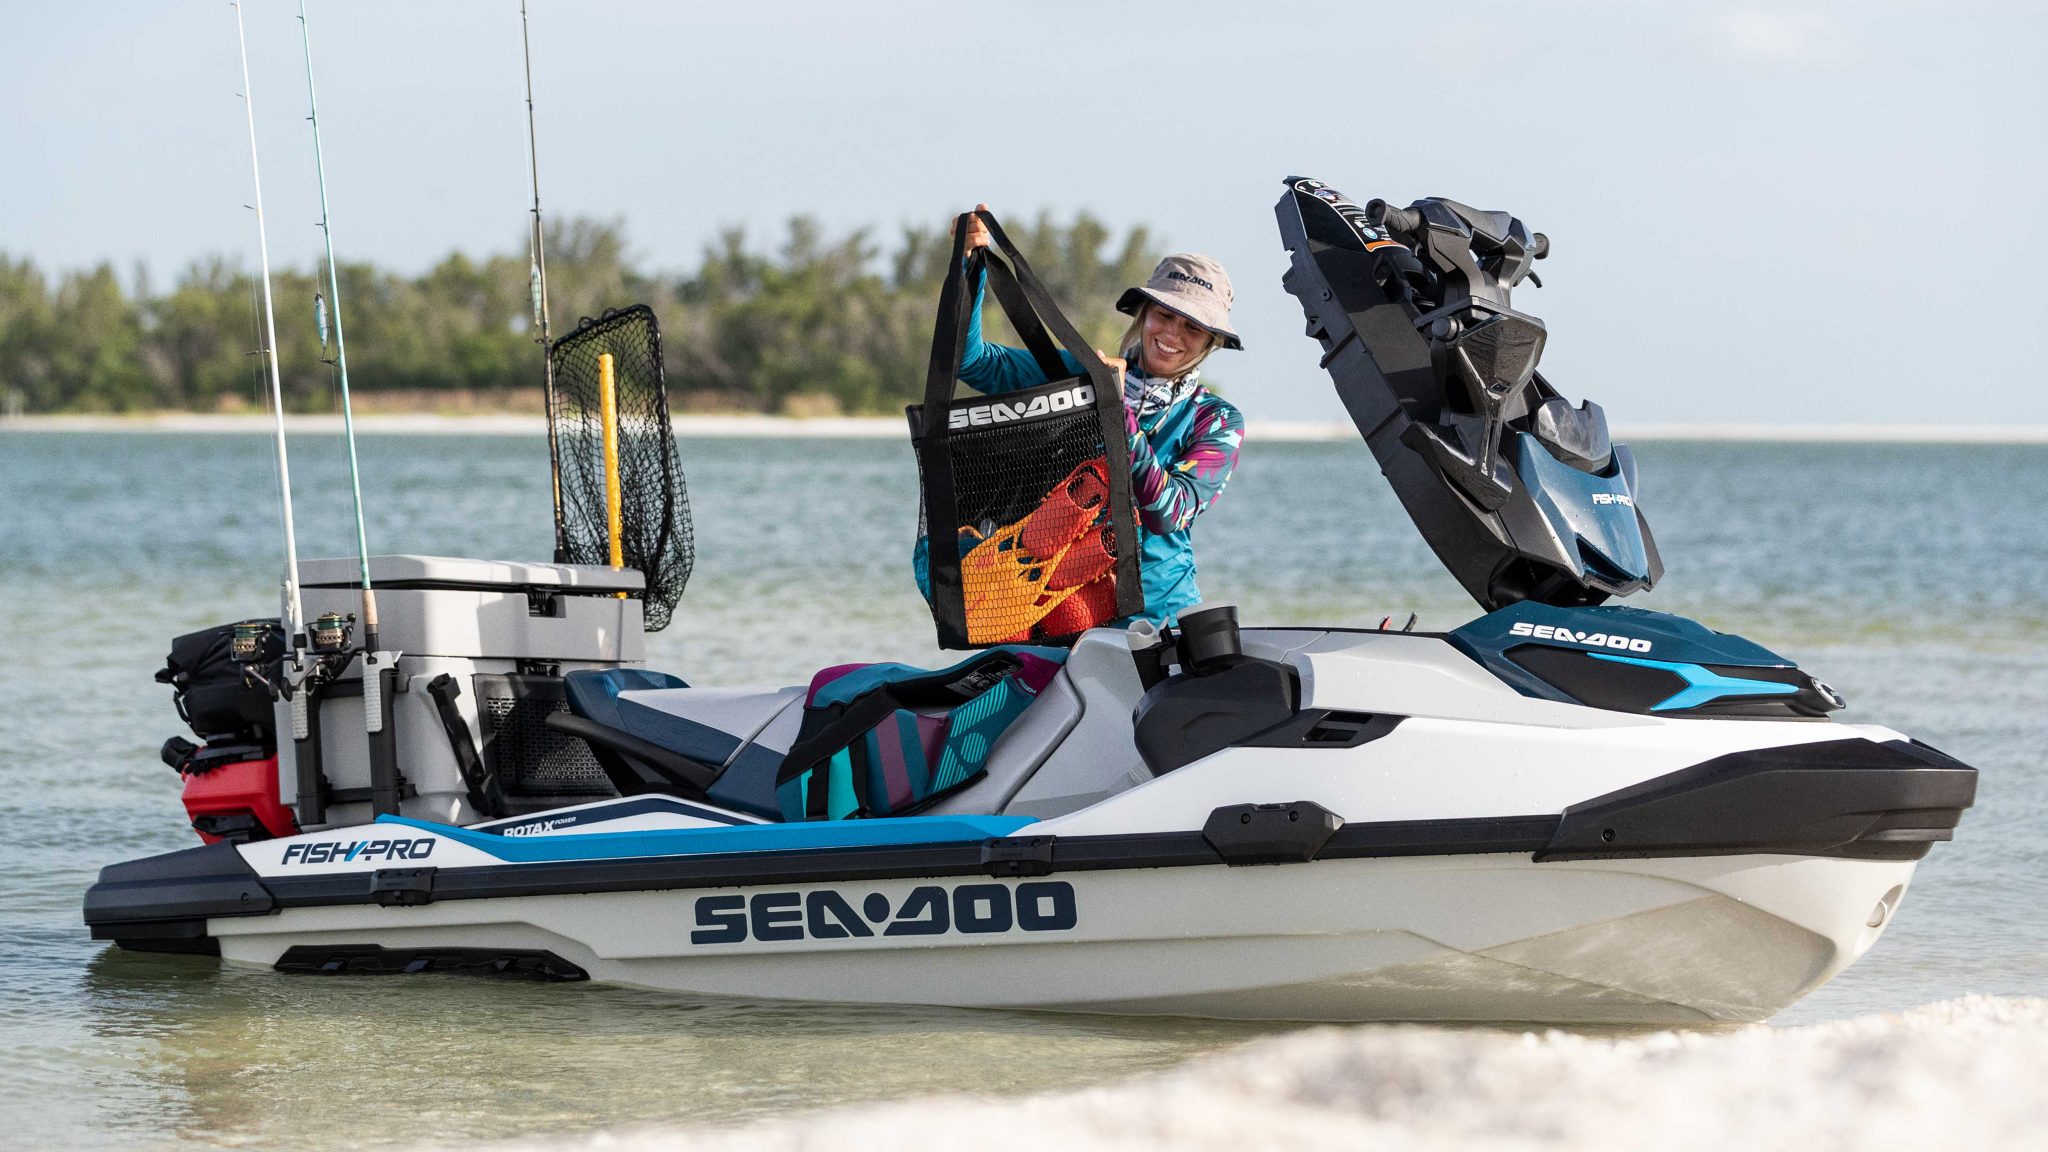 2022 SeaDoo Fish Pro expands to three models, gains new accessories